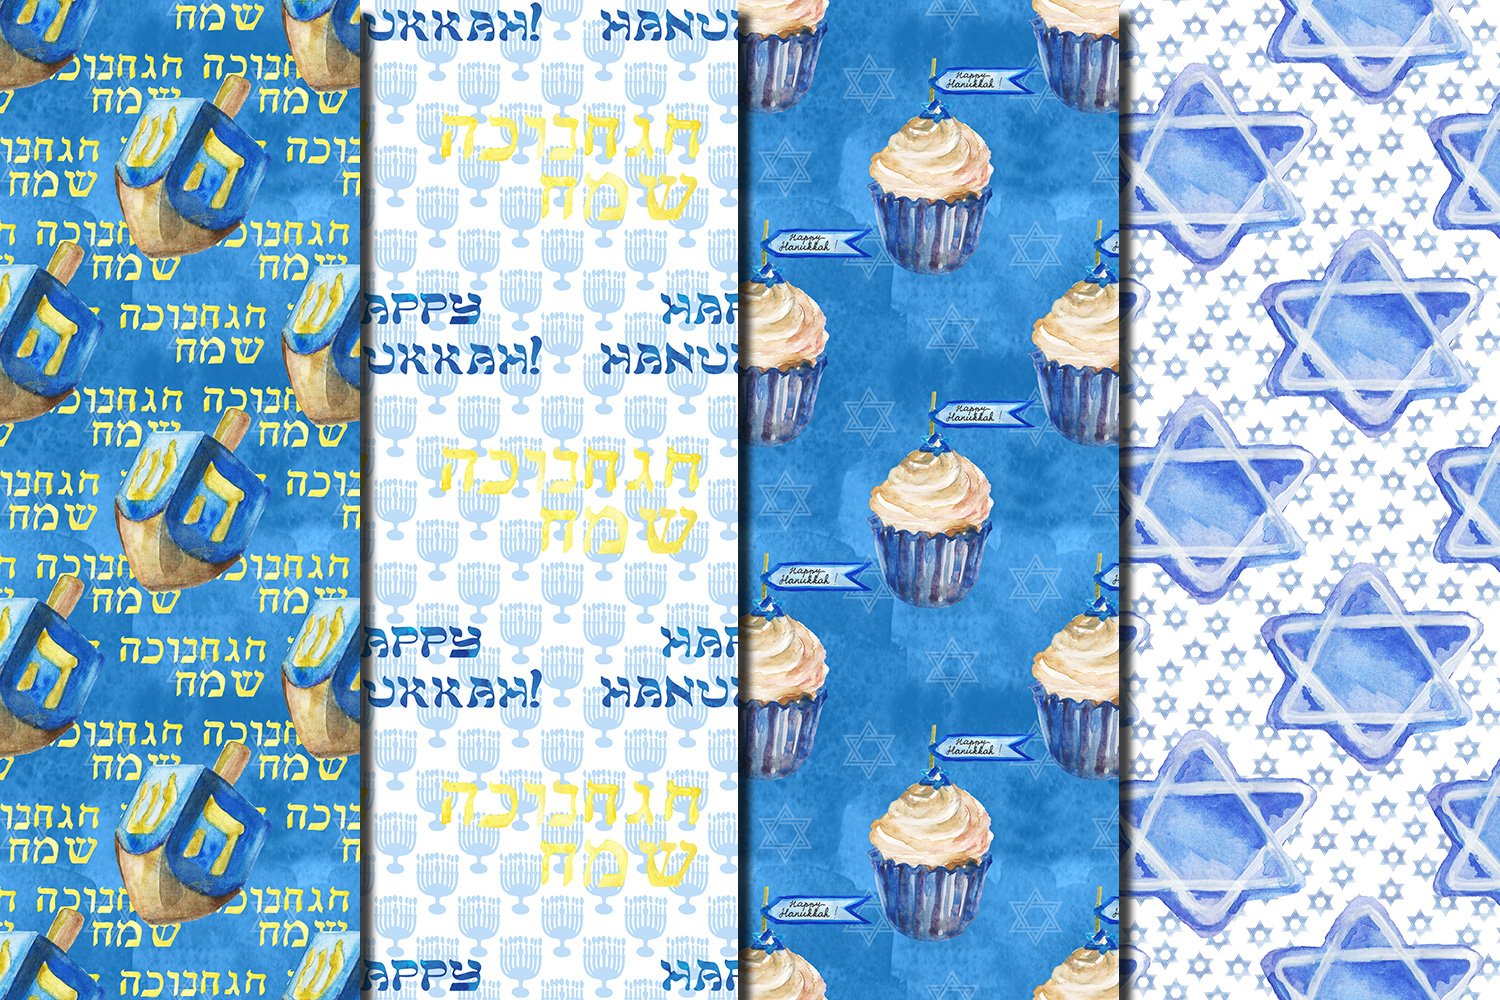 Beautiful images of blue-toned baked goods and other Hanukkah treats.